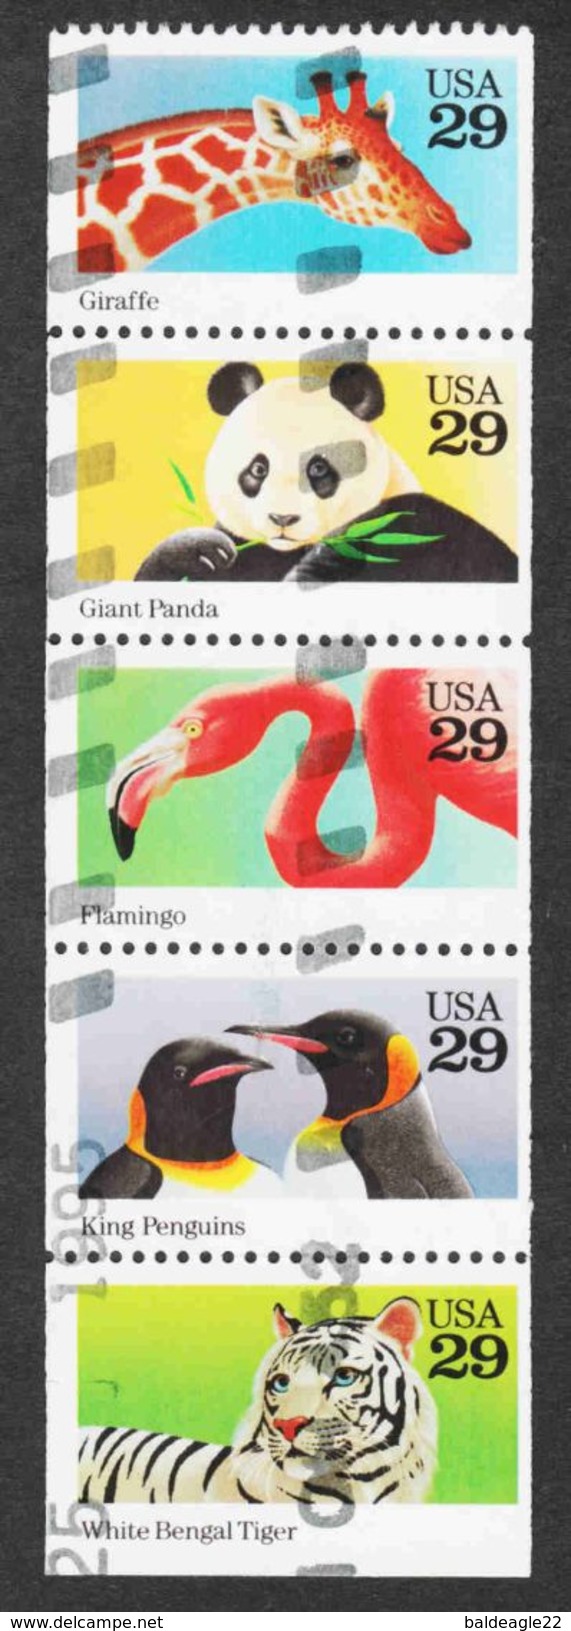 United States - Scott #2709a Used - Booklet Pane - 3. 1981-...